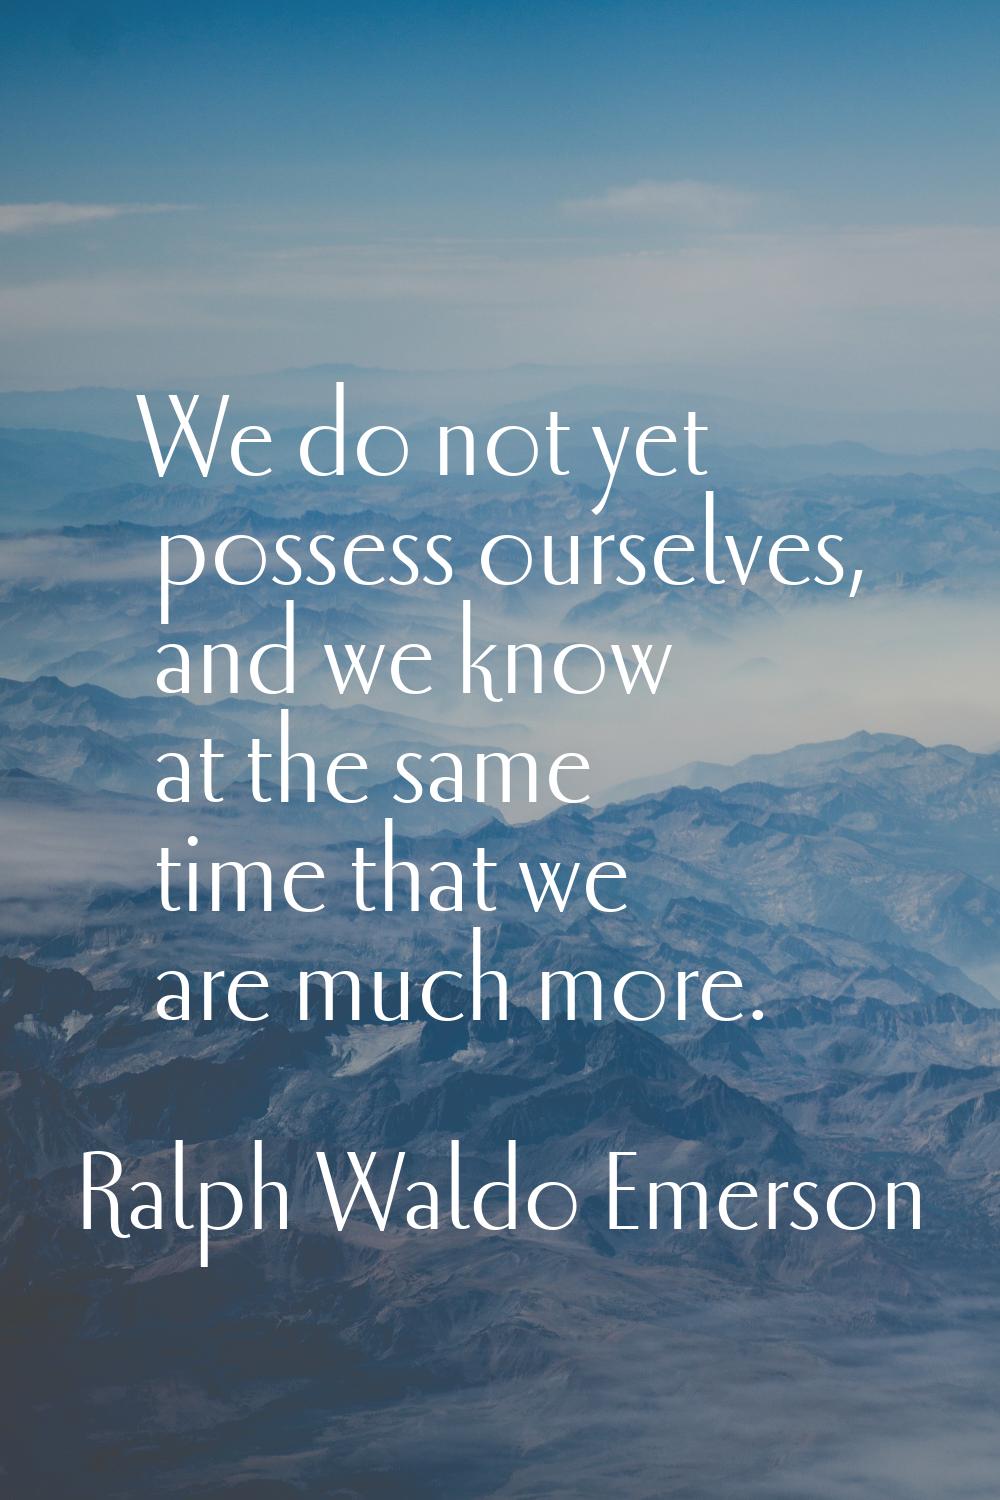 We do not yet possess ourselves, and we know at the same time that we are much more.